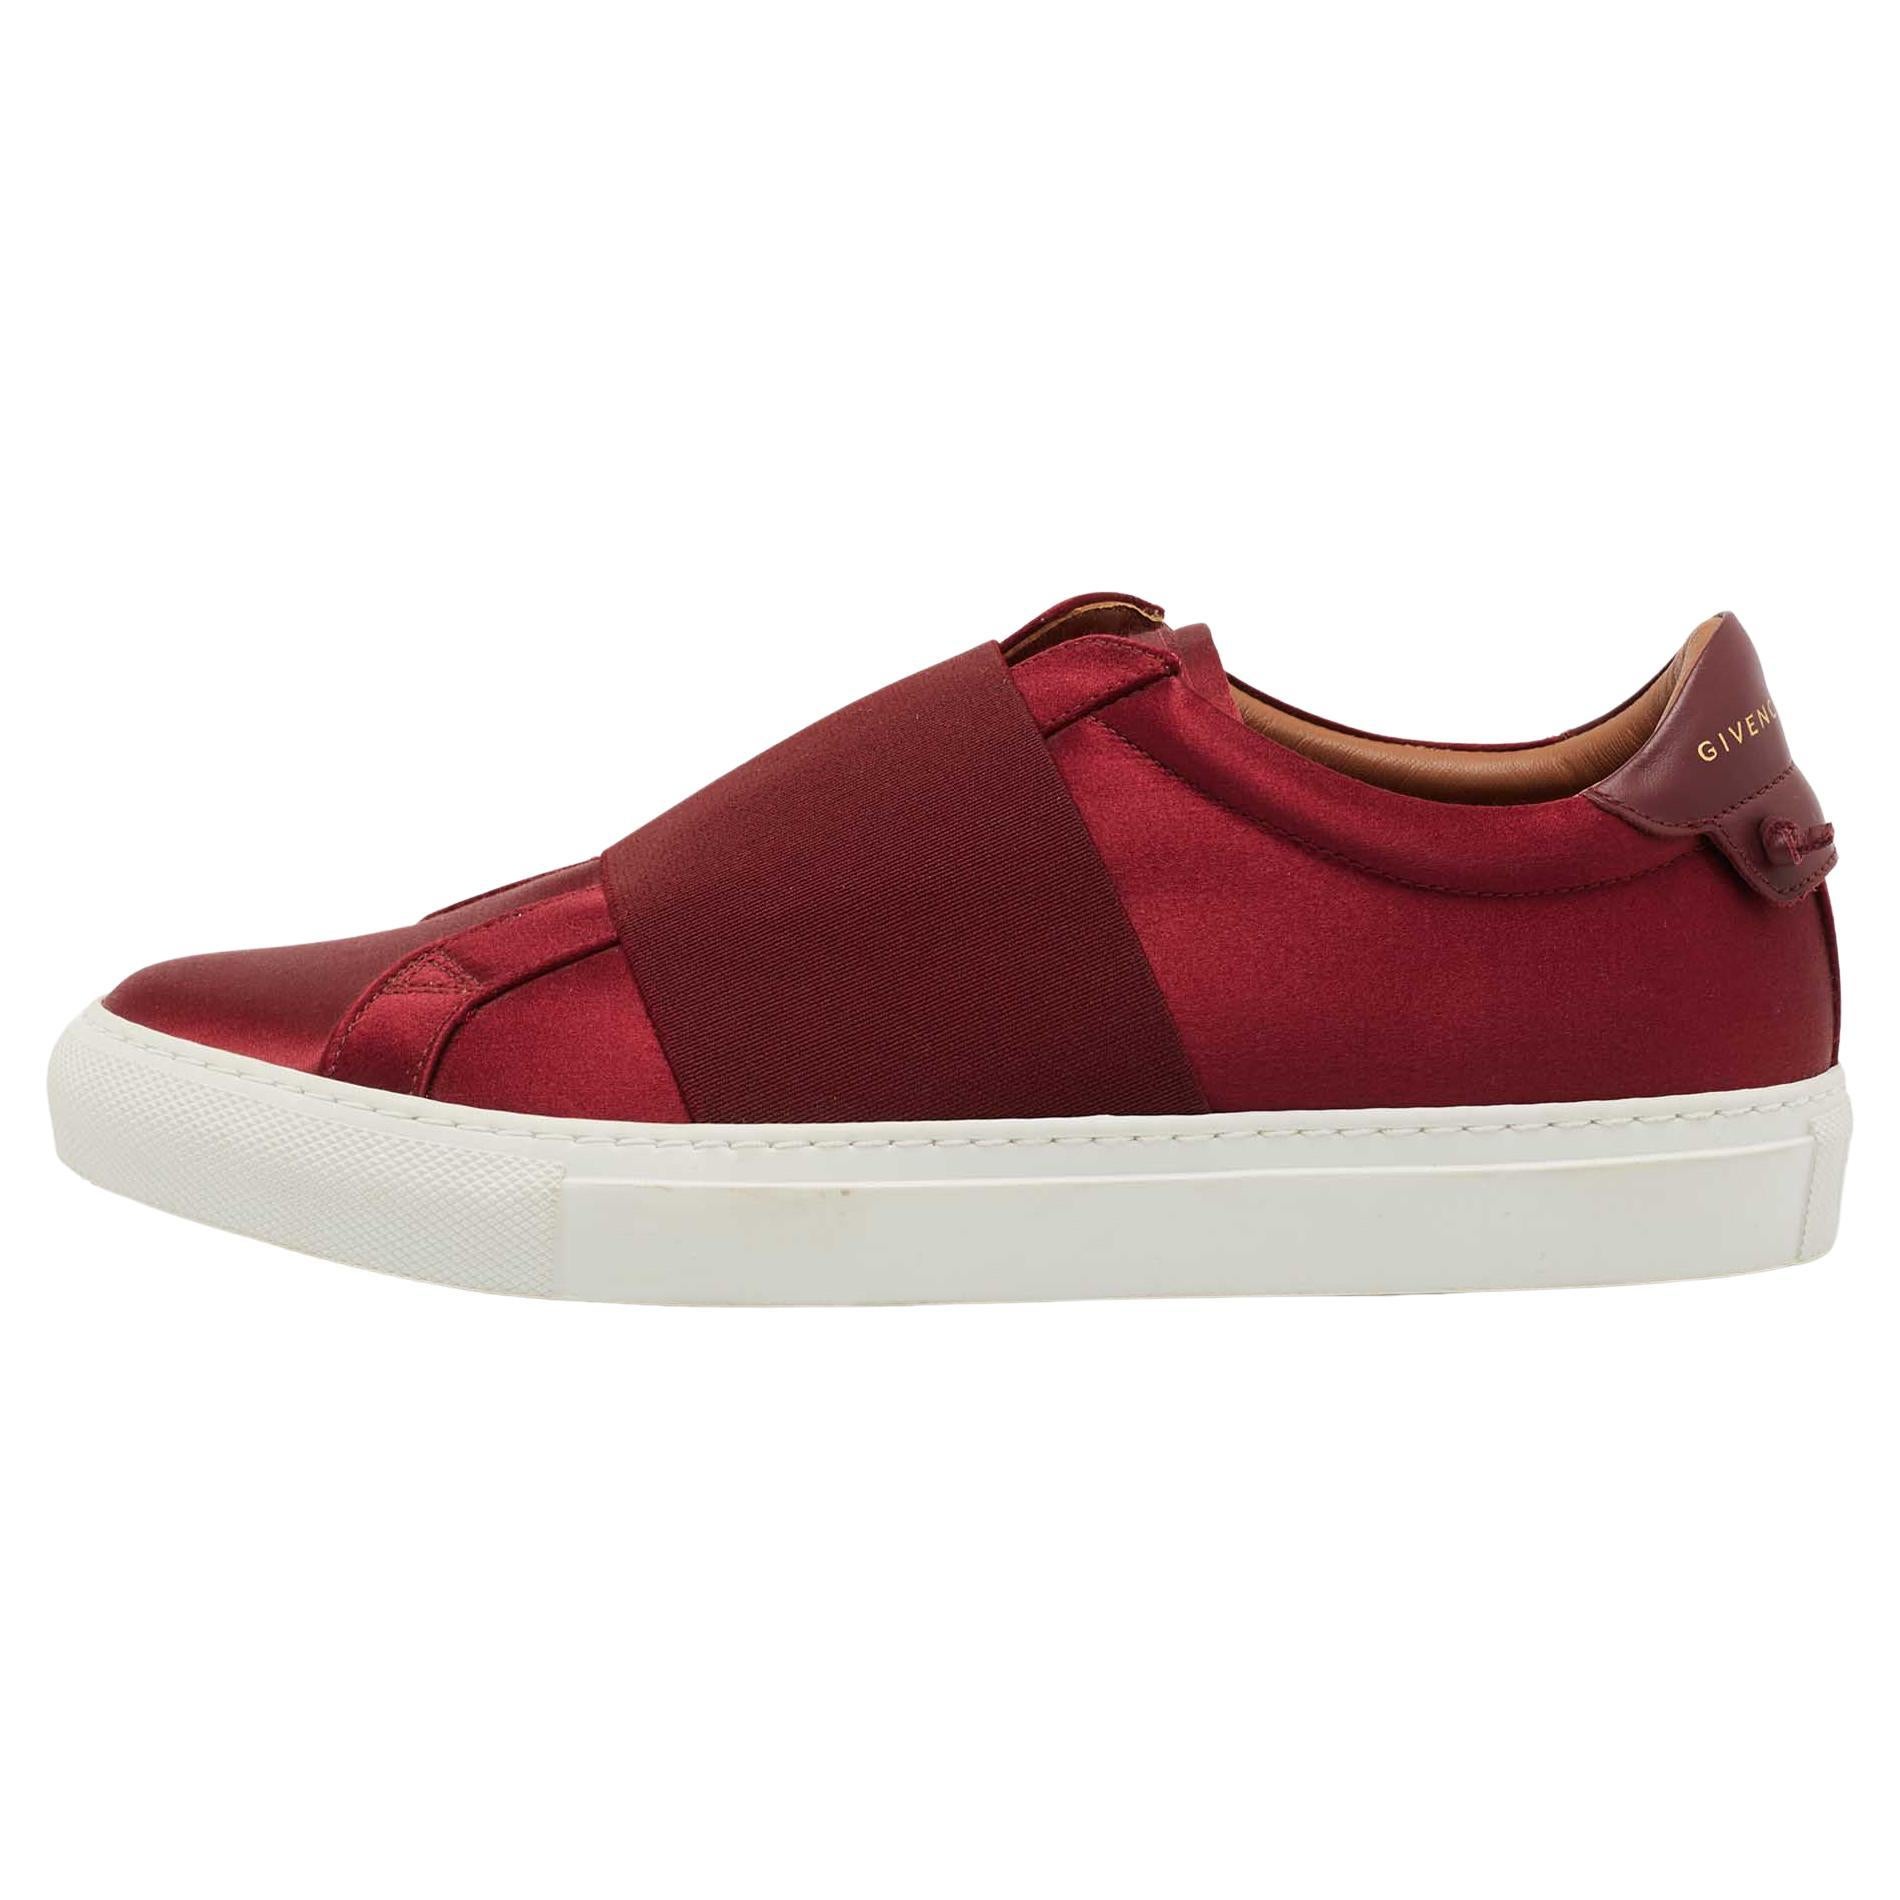 Givenchy Burgundy Satin and Elastic Band Slip On Sneakers Size 40 For Sale